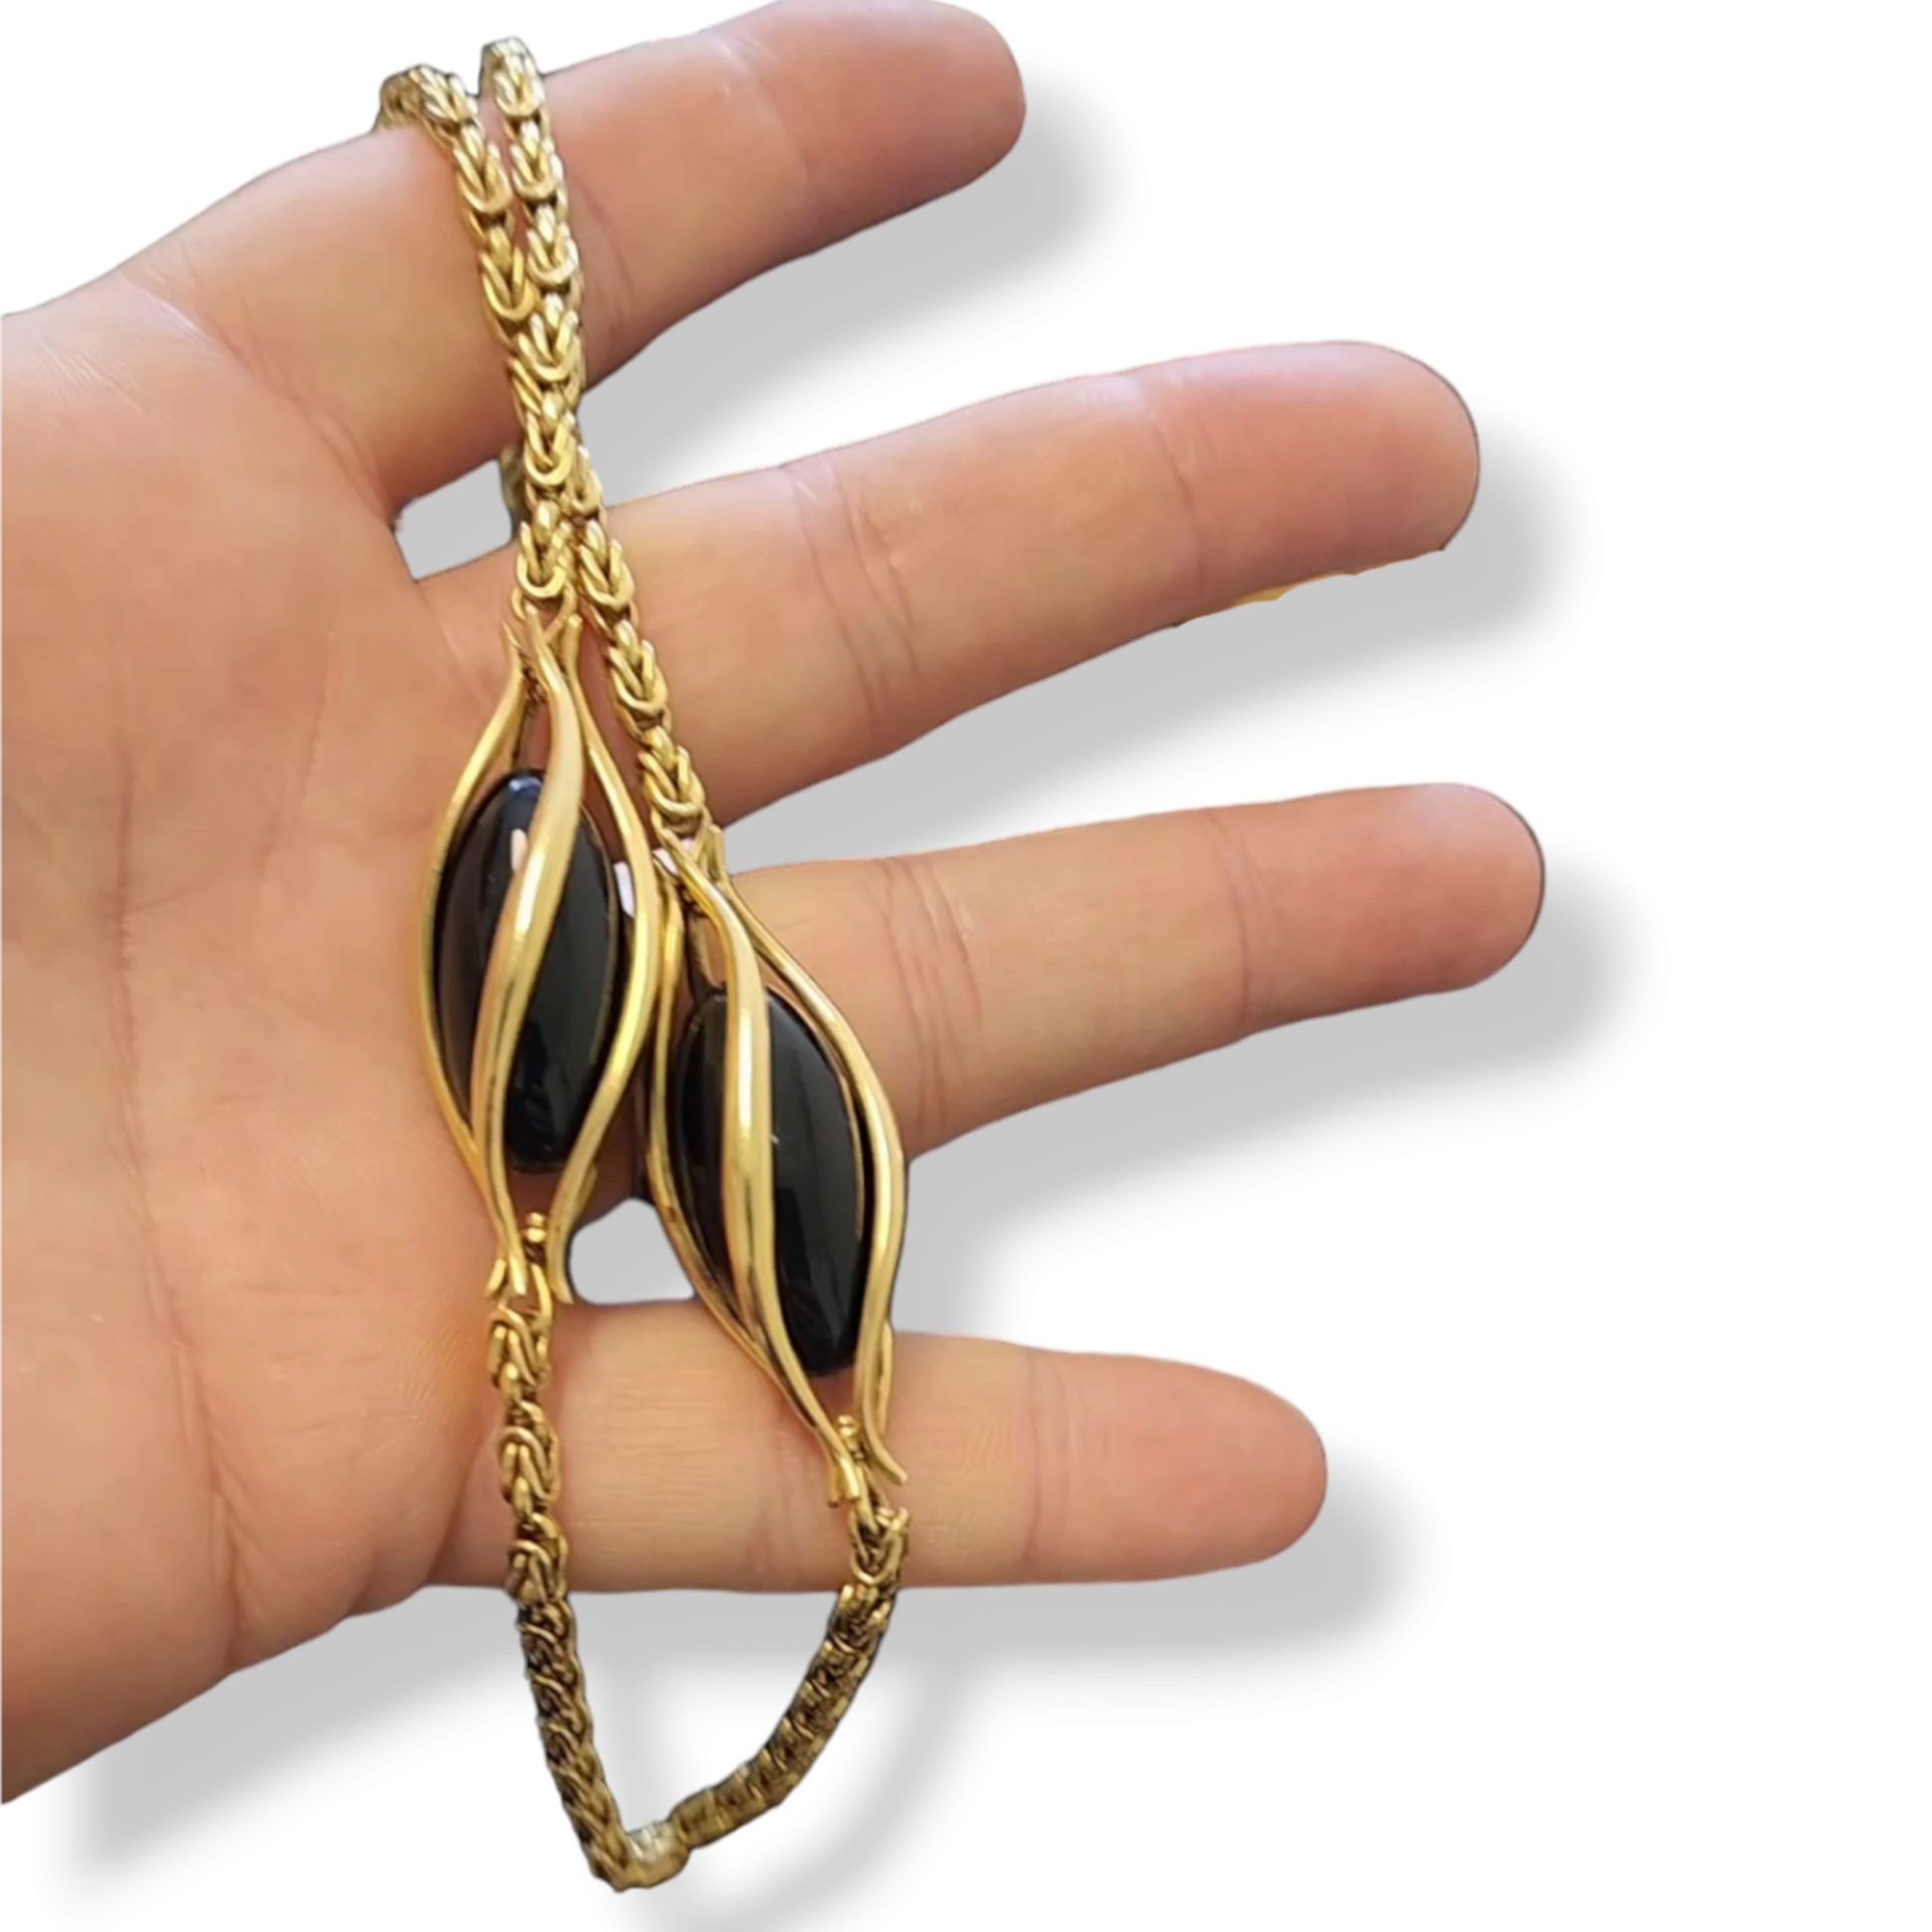 Bucherer 1970s 18KT Yellow Gold Onyx Byzantine Link Chain Necklace in hand